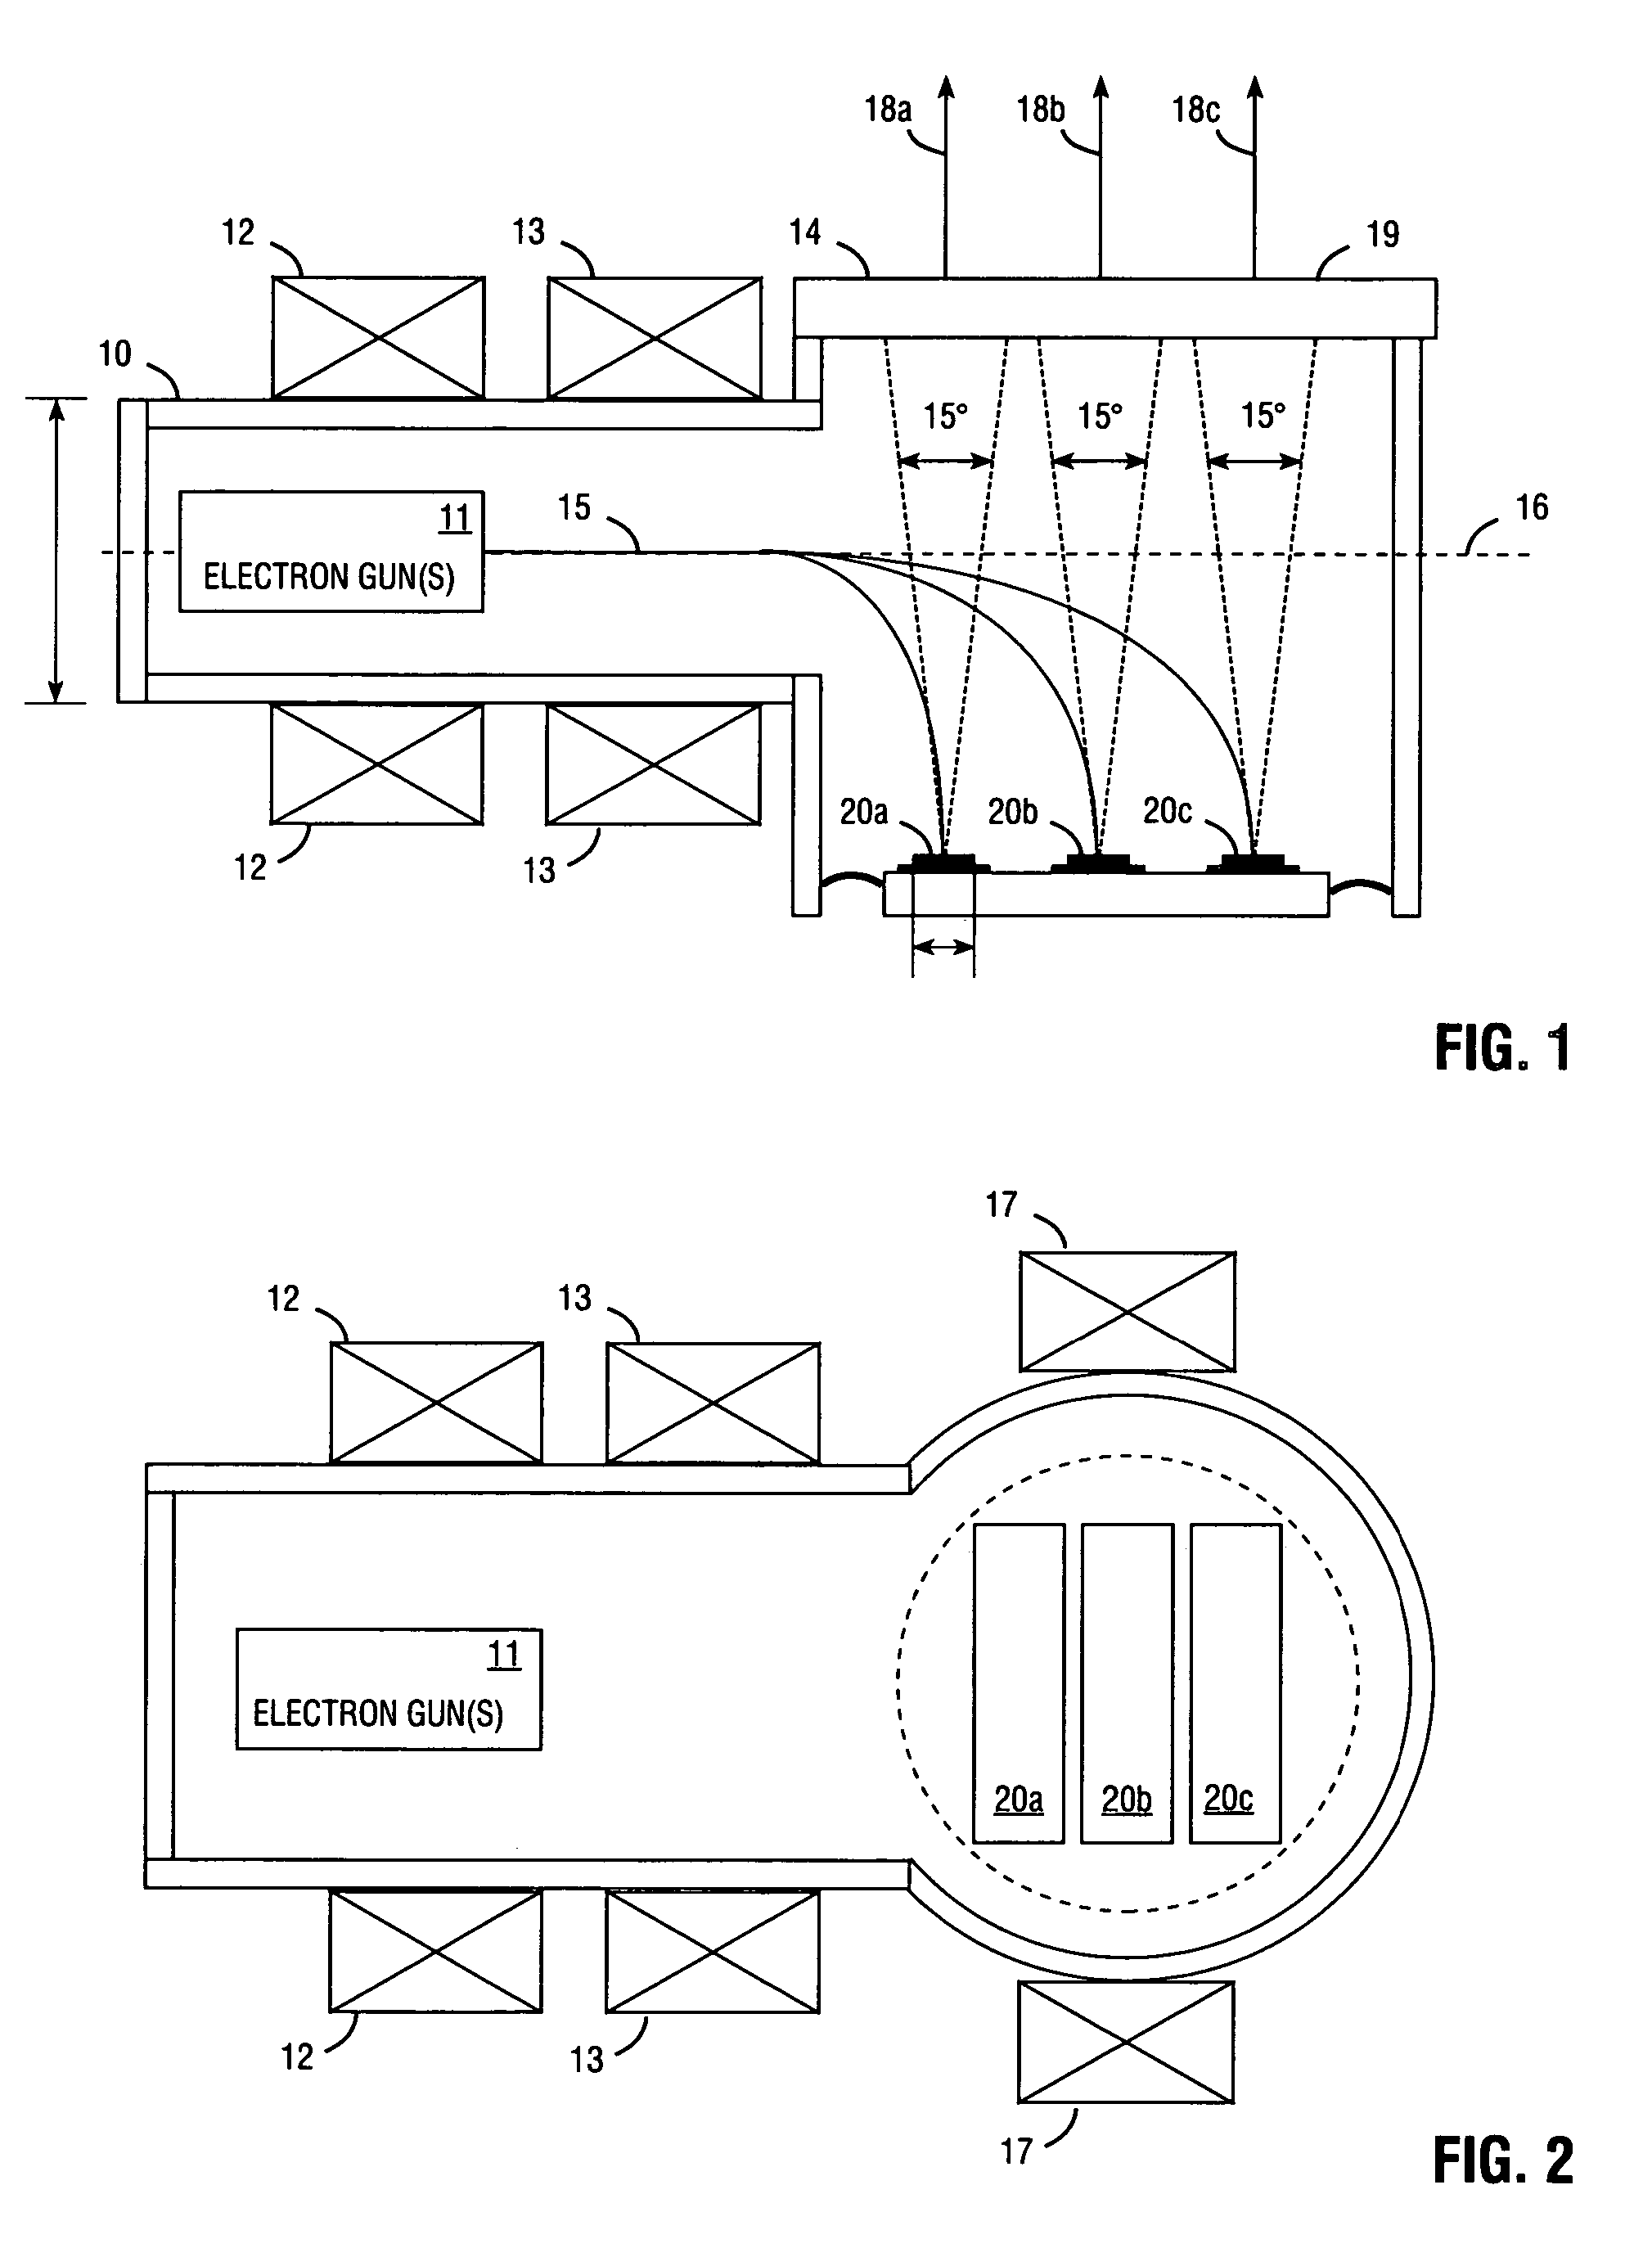 Electron beam pumped laser light source for projection television